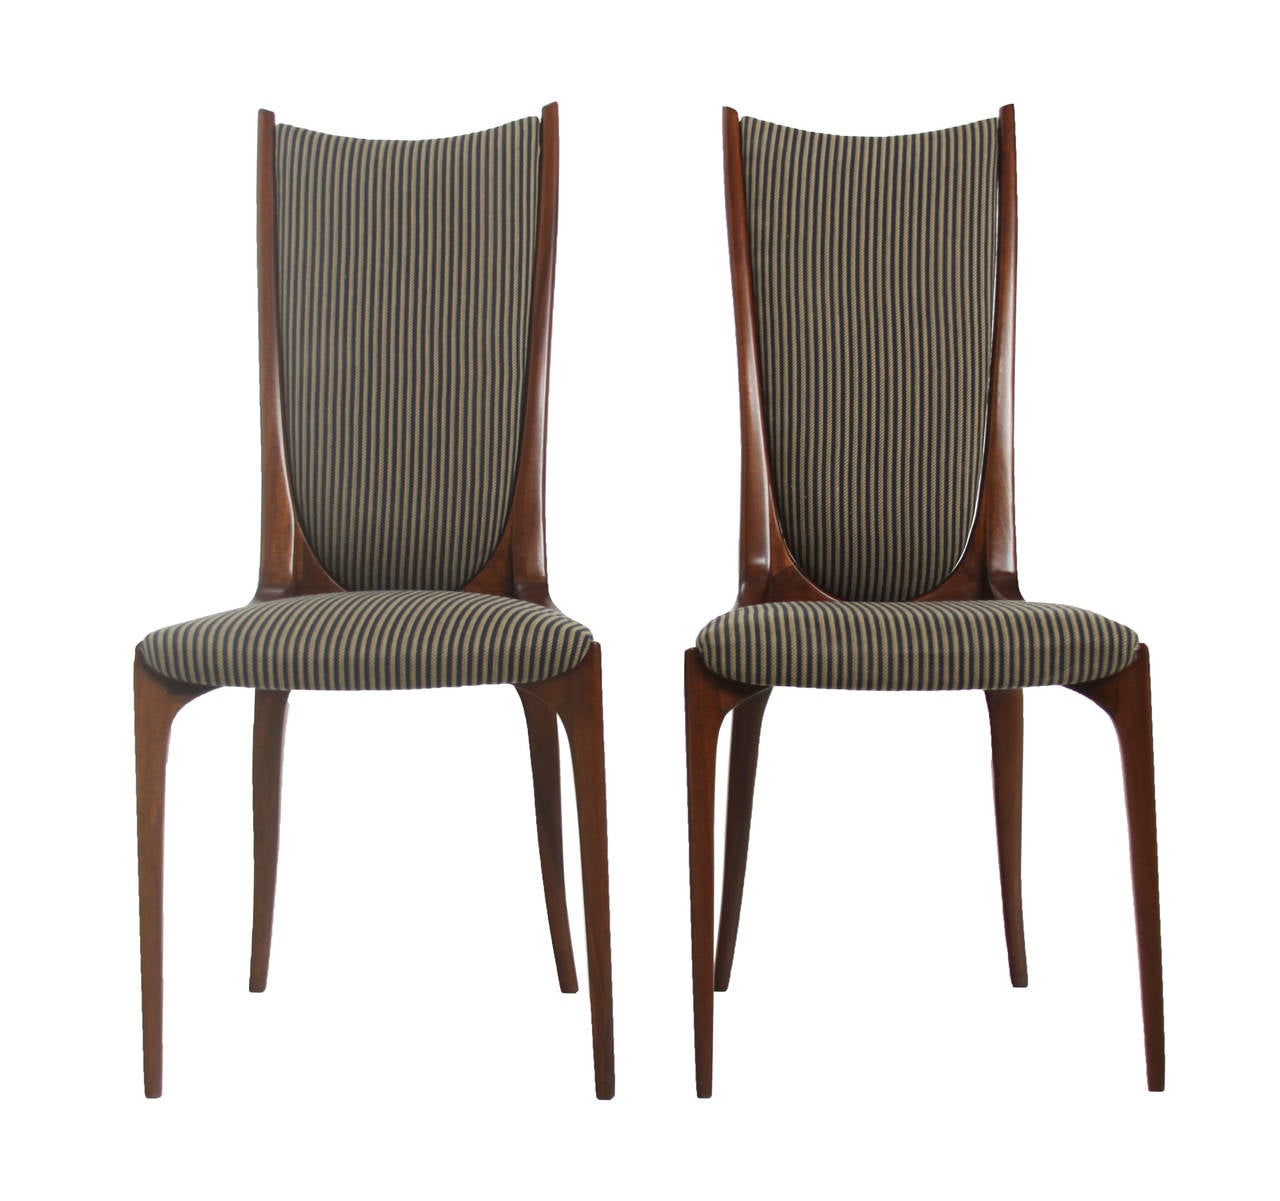 A beautiful pair of sculptural, high-backed chairs in the style of Giuseppe Scapinelli. These chairs are solid Caviuna and have been upholstered in striped fabric.

Many pieces are stored in our warehouse, so please click on CONTACT DEALER under